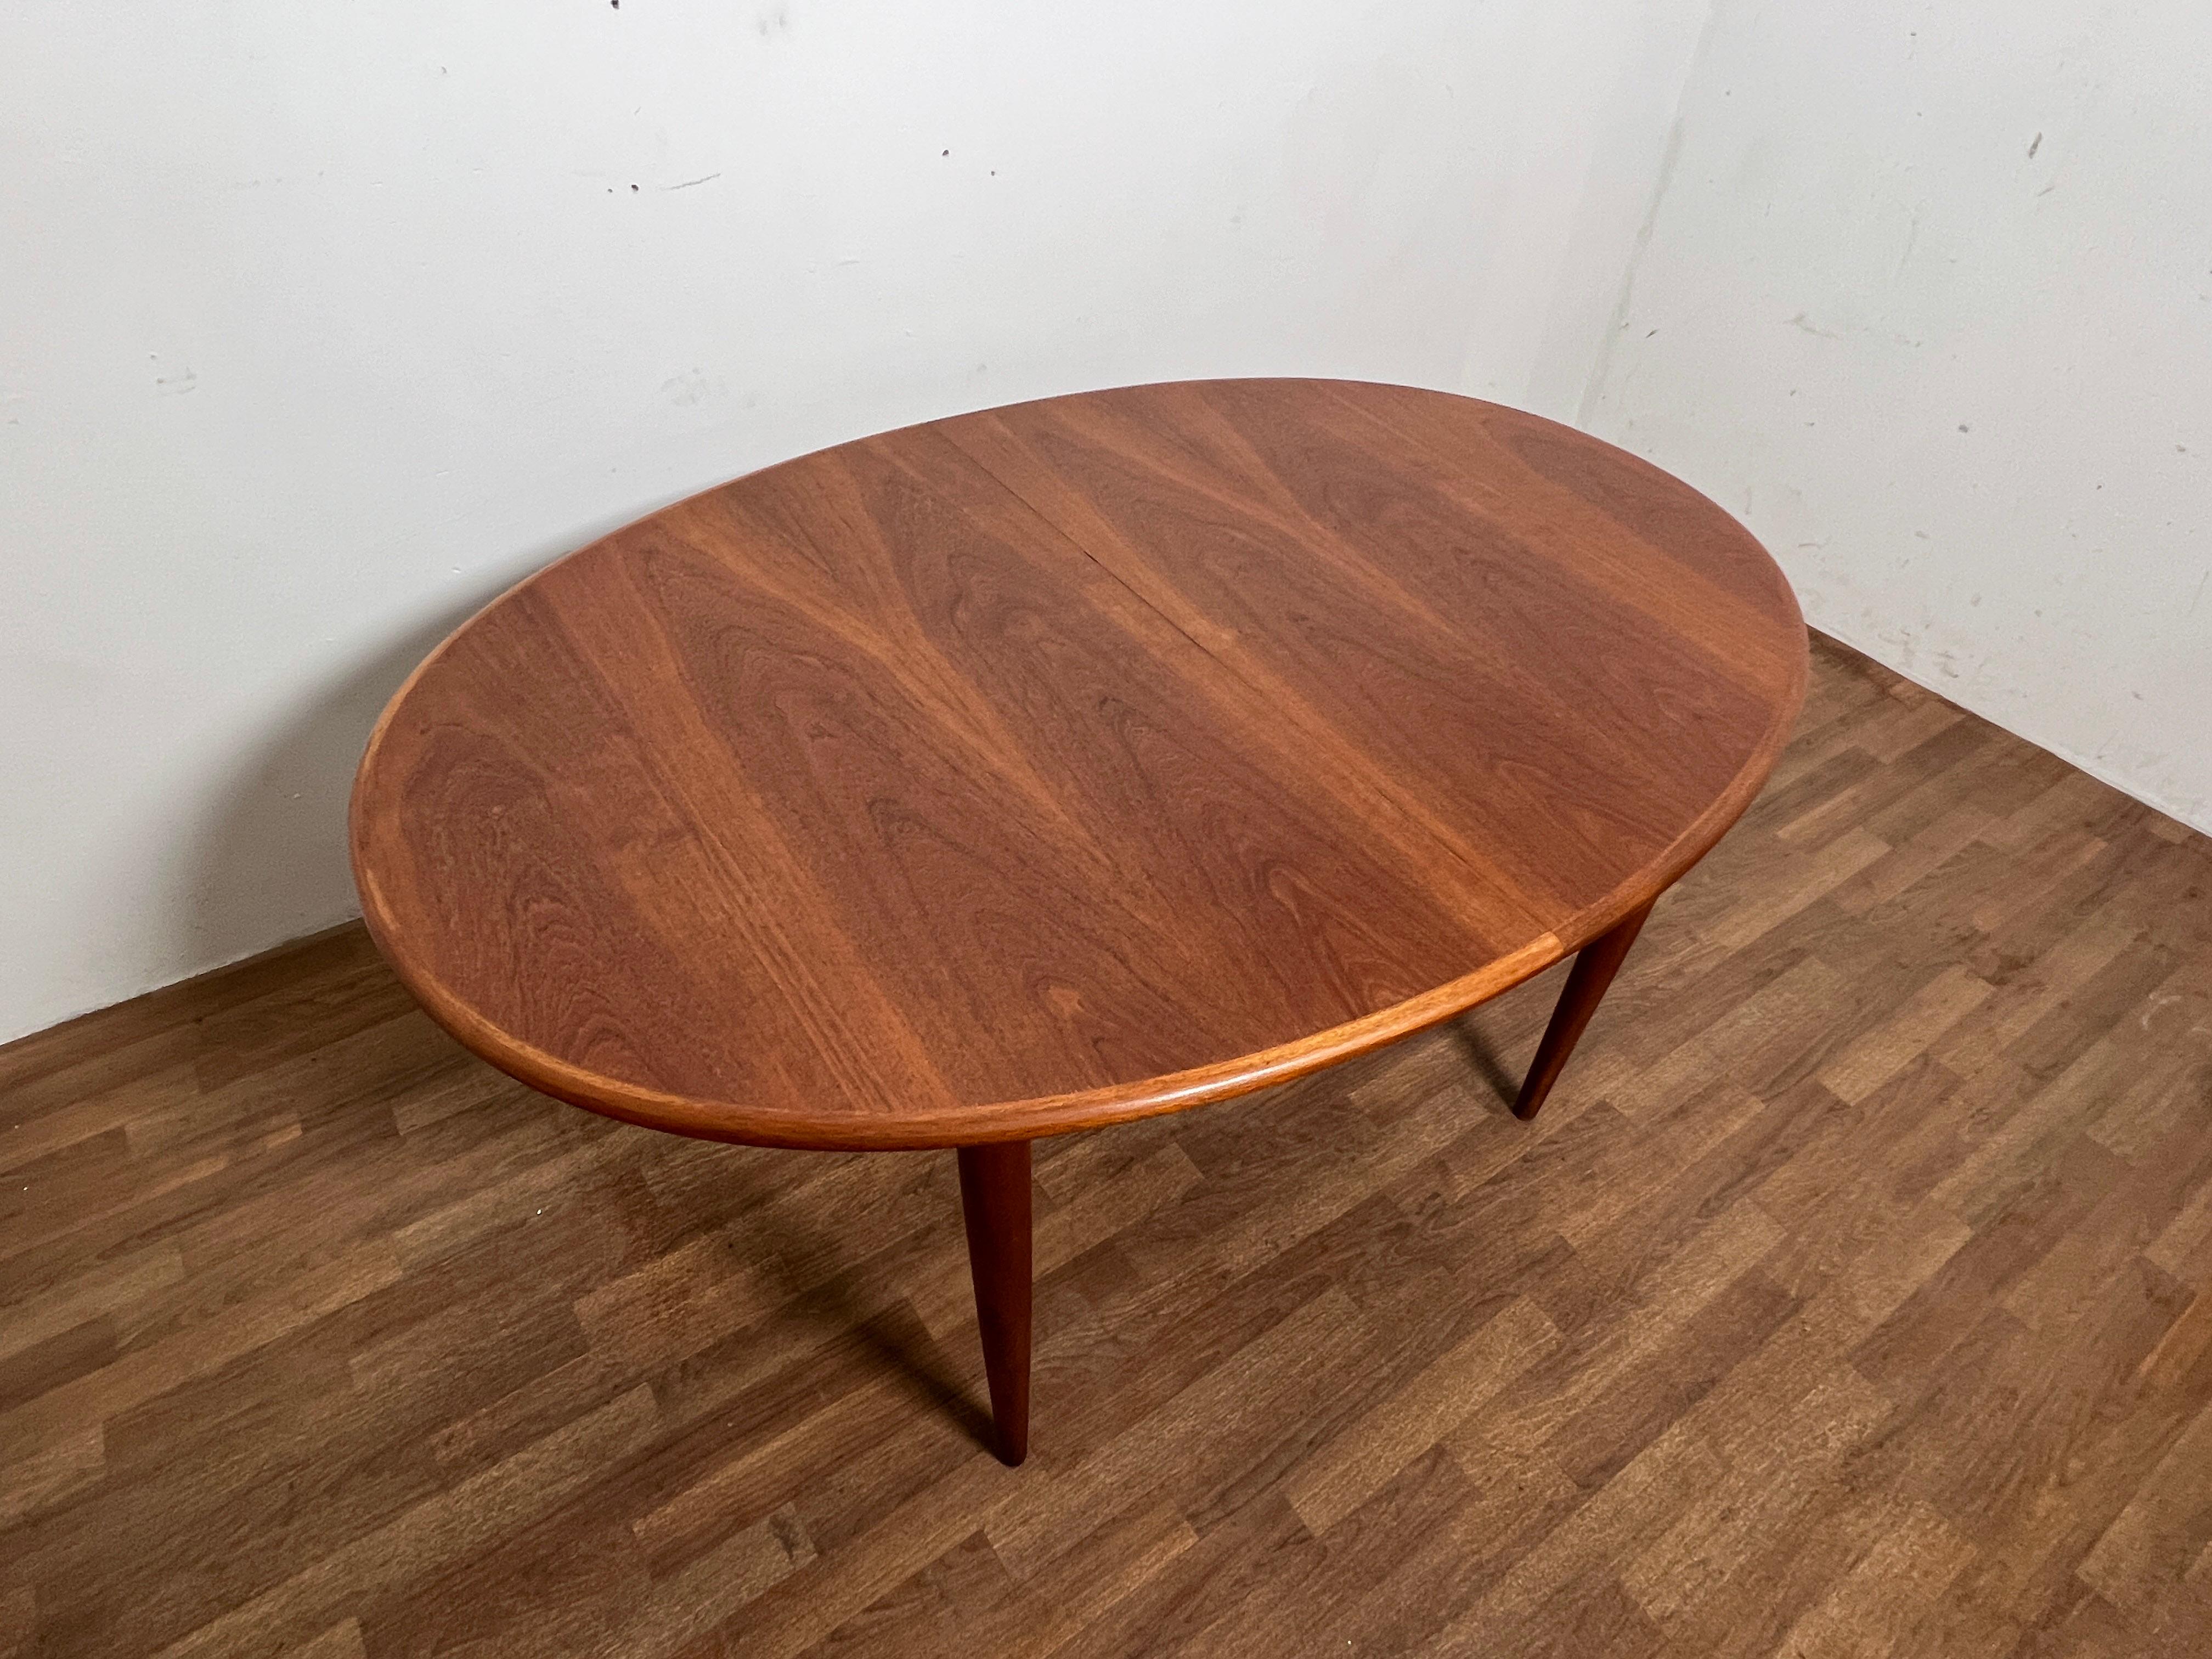 Scandinavian Modern Danish Teak Oval Dining Table With Two Leaves by Gudme, Circa 1960s